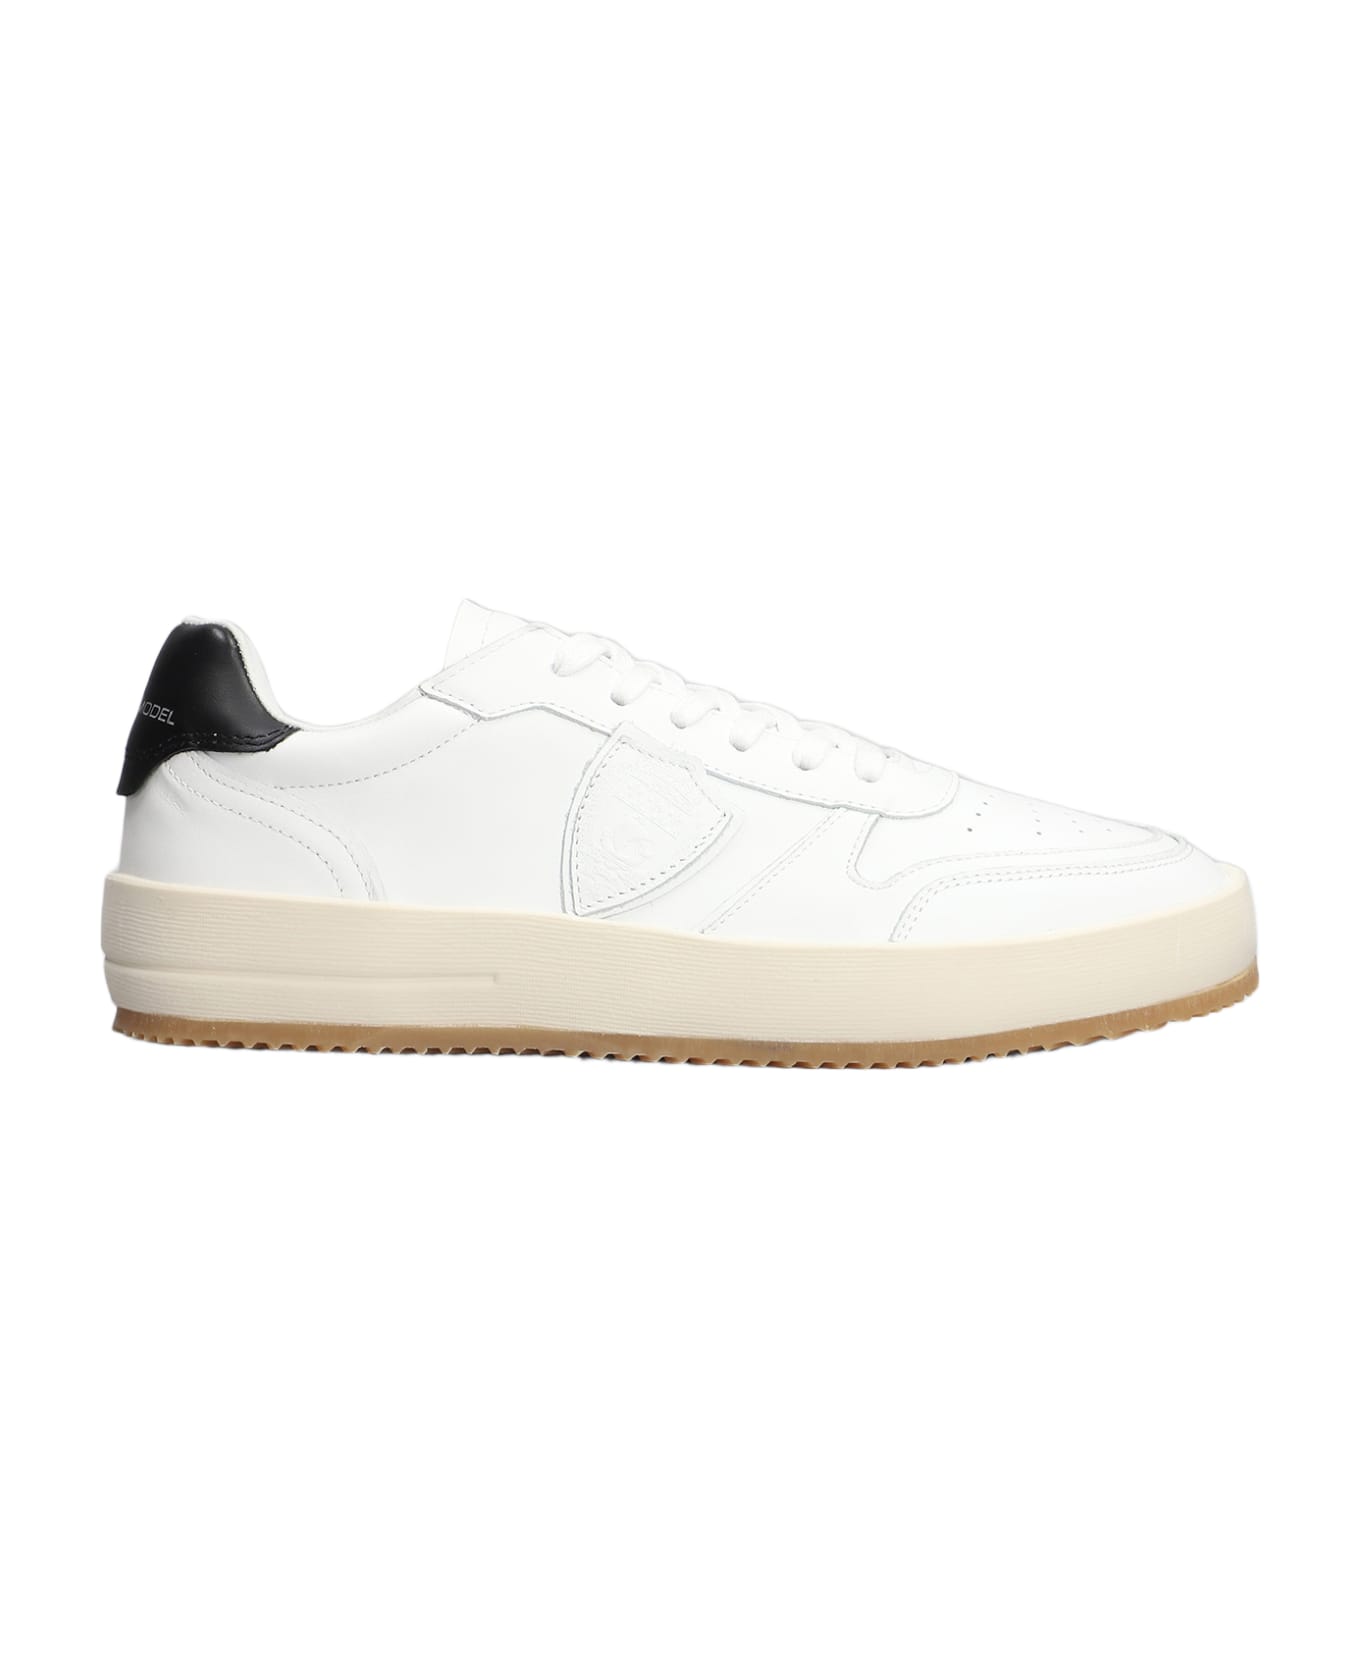 Philippe Model Nice Low Sneakers In White Leather - white スニーカー